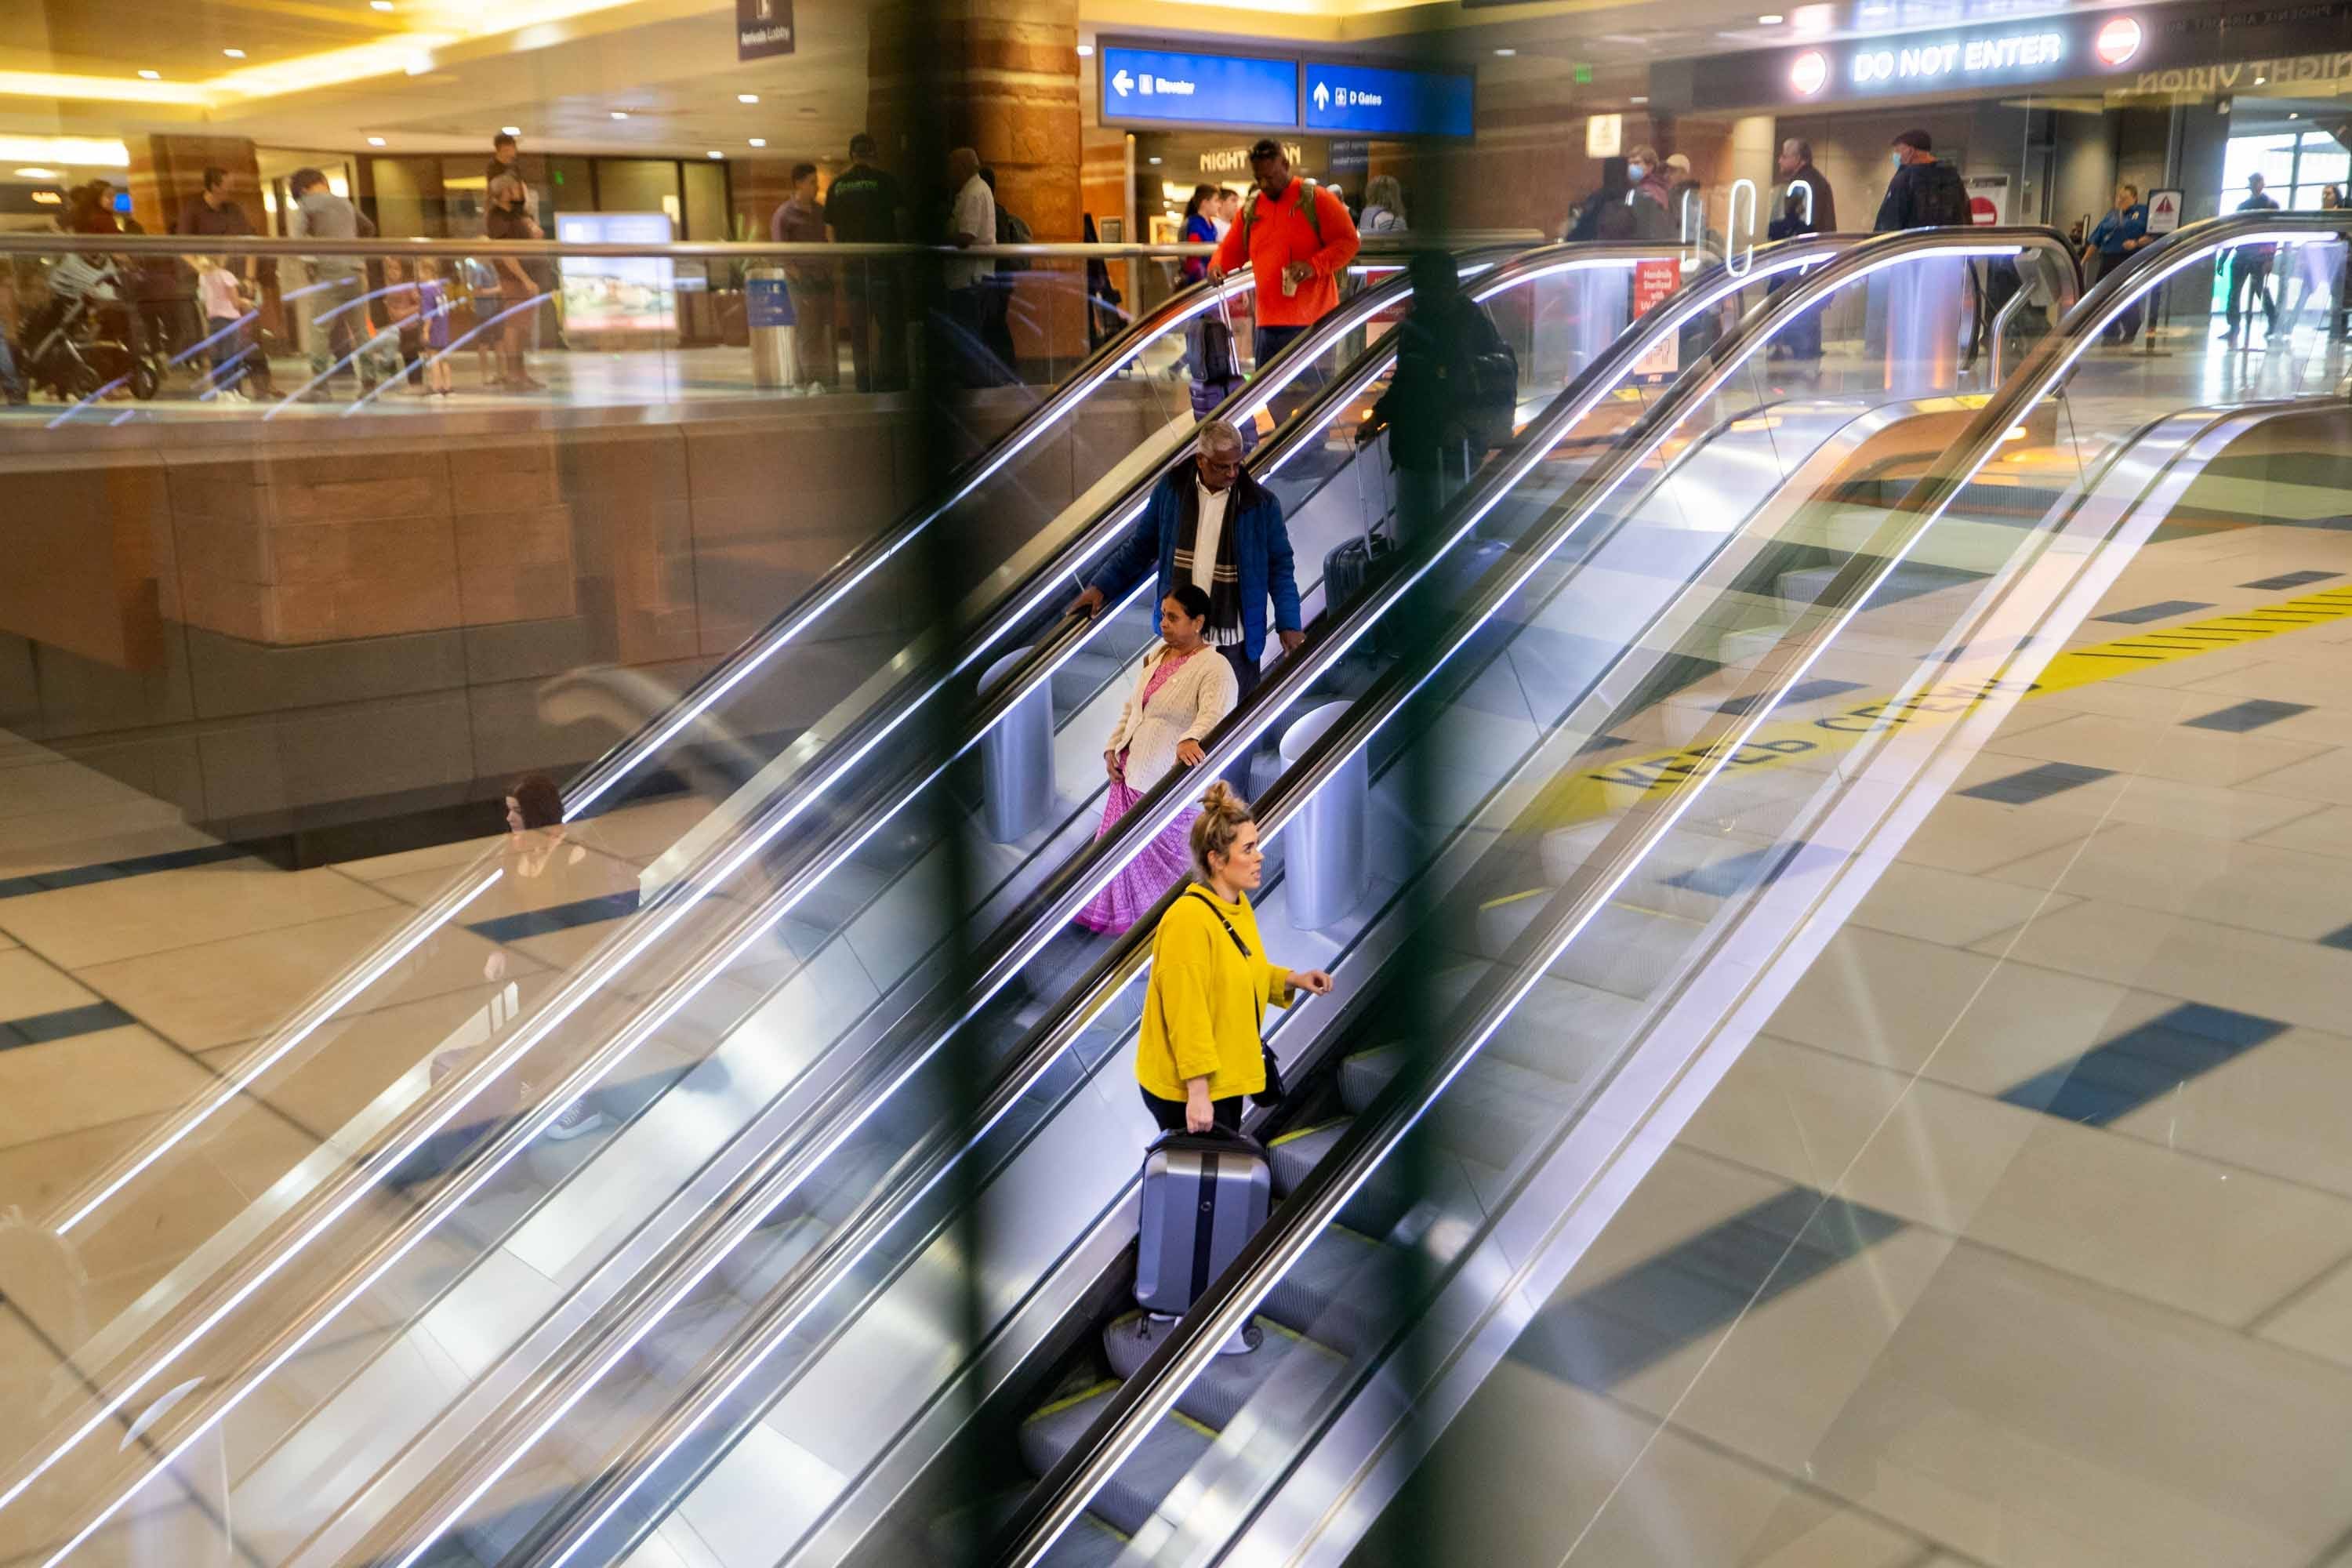 This is the most stressful airport in the US, according to a new report